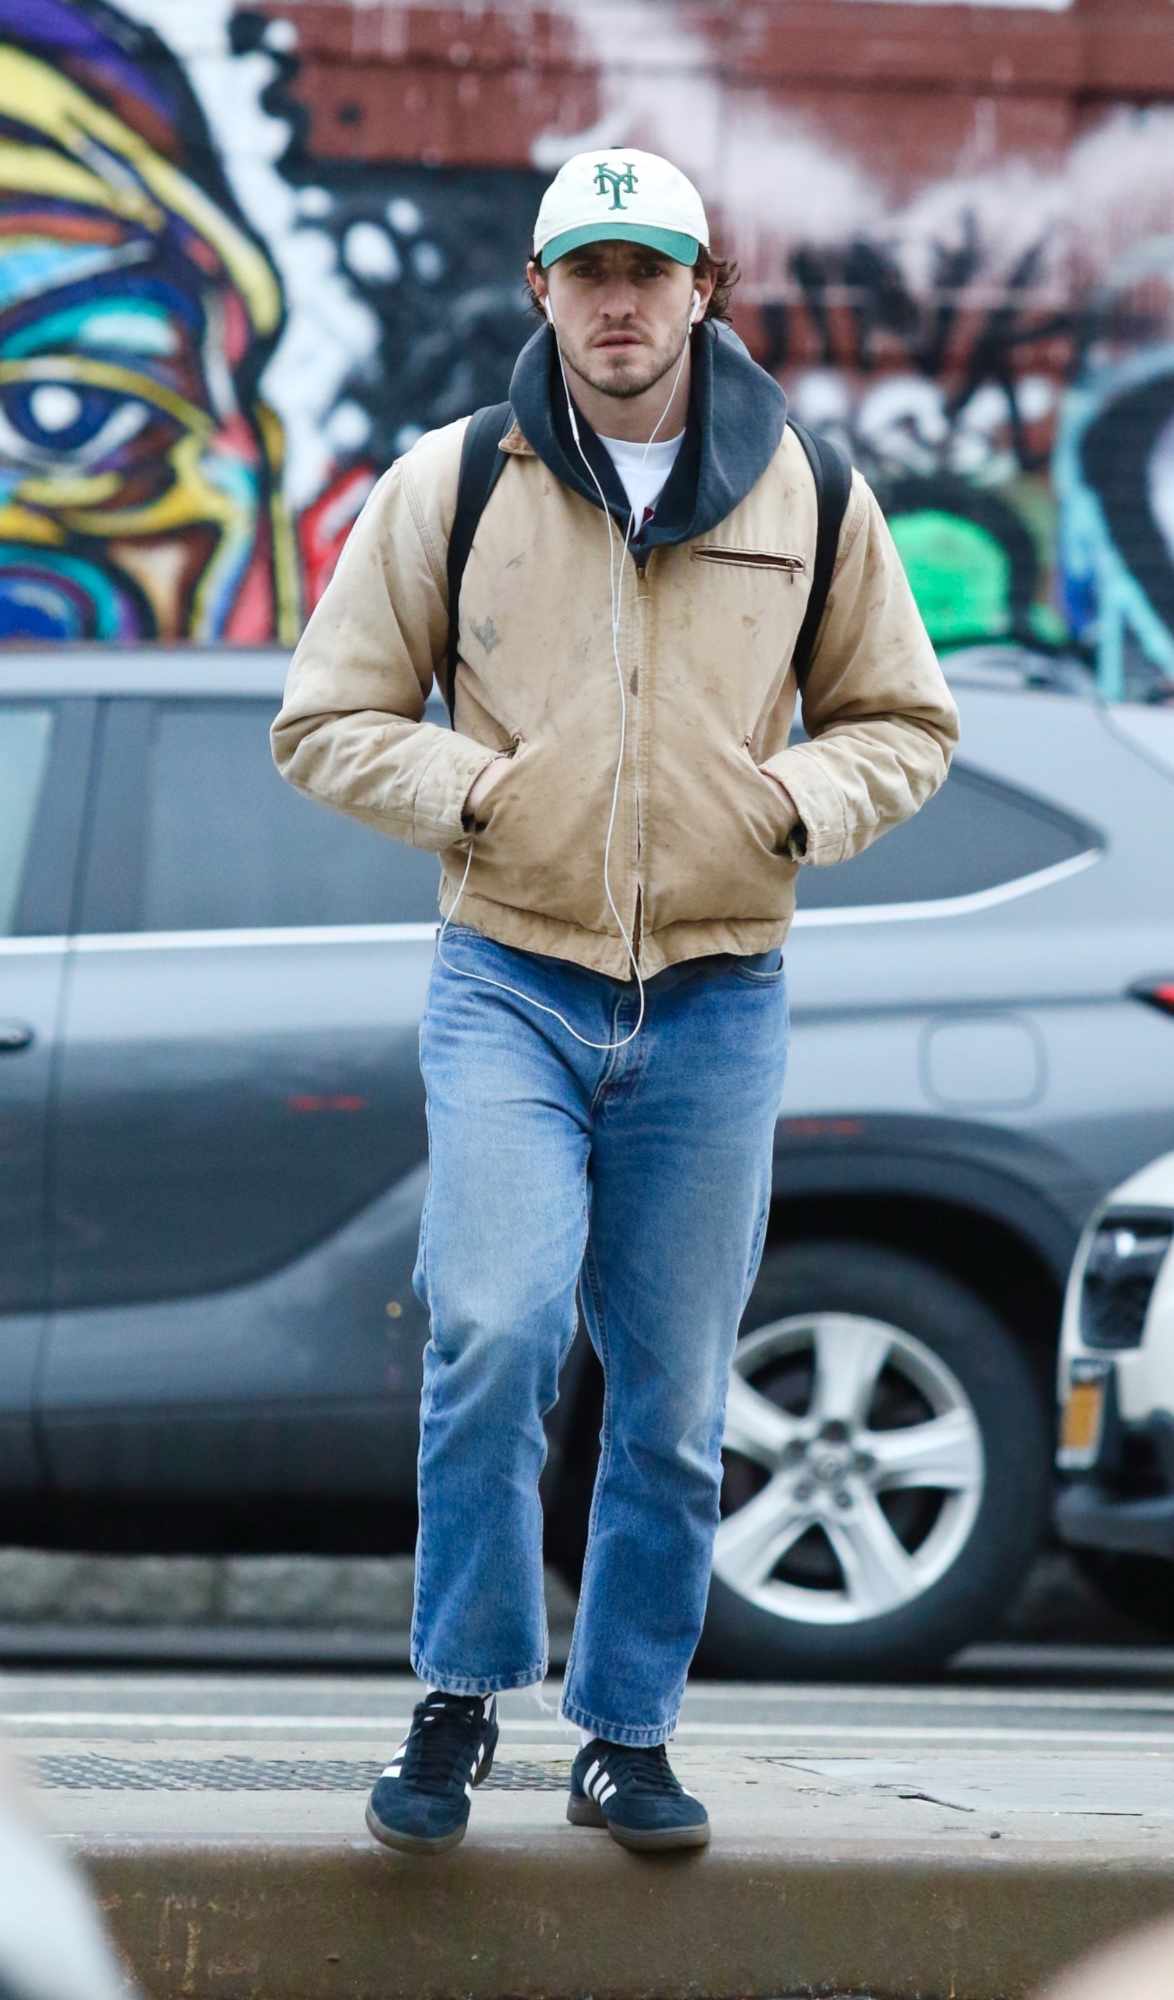 Paul Mescal wears wired earbuds, a Carhartt jacket, jeans & adidas sneakers